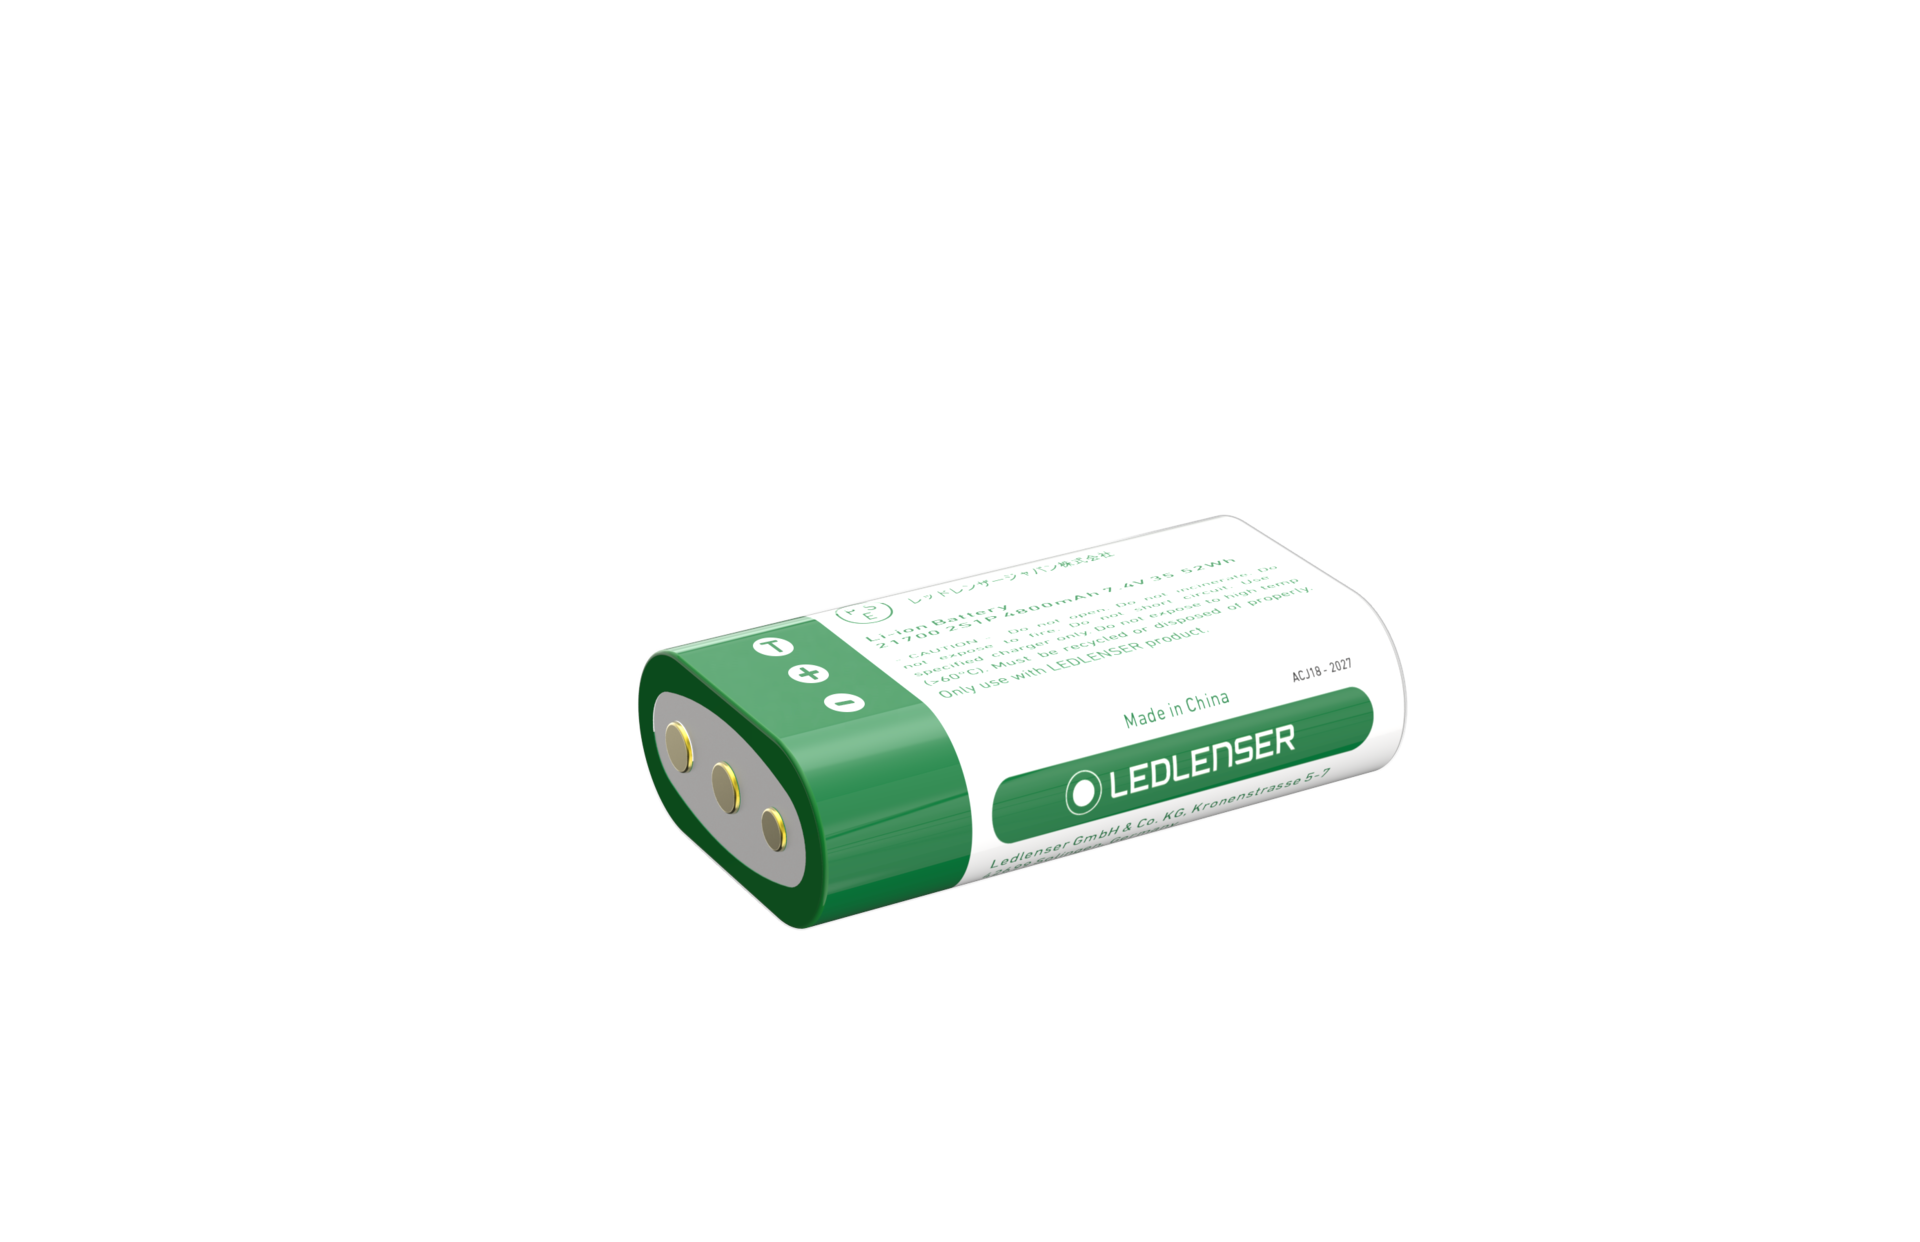 2x 21700 Li-ion Rechargeable Battery Pack